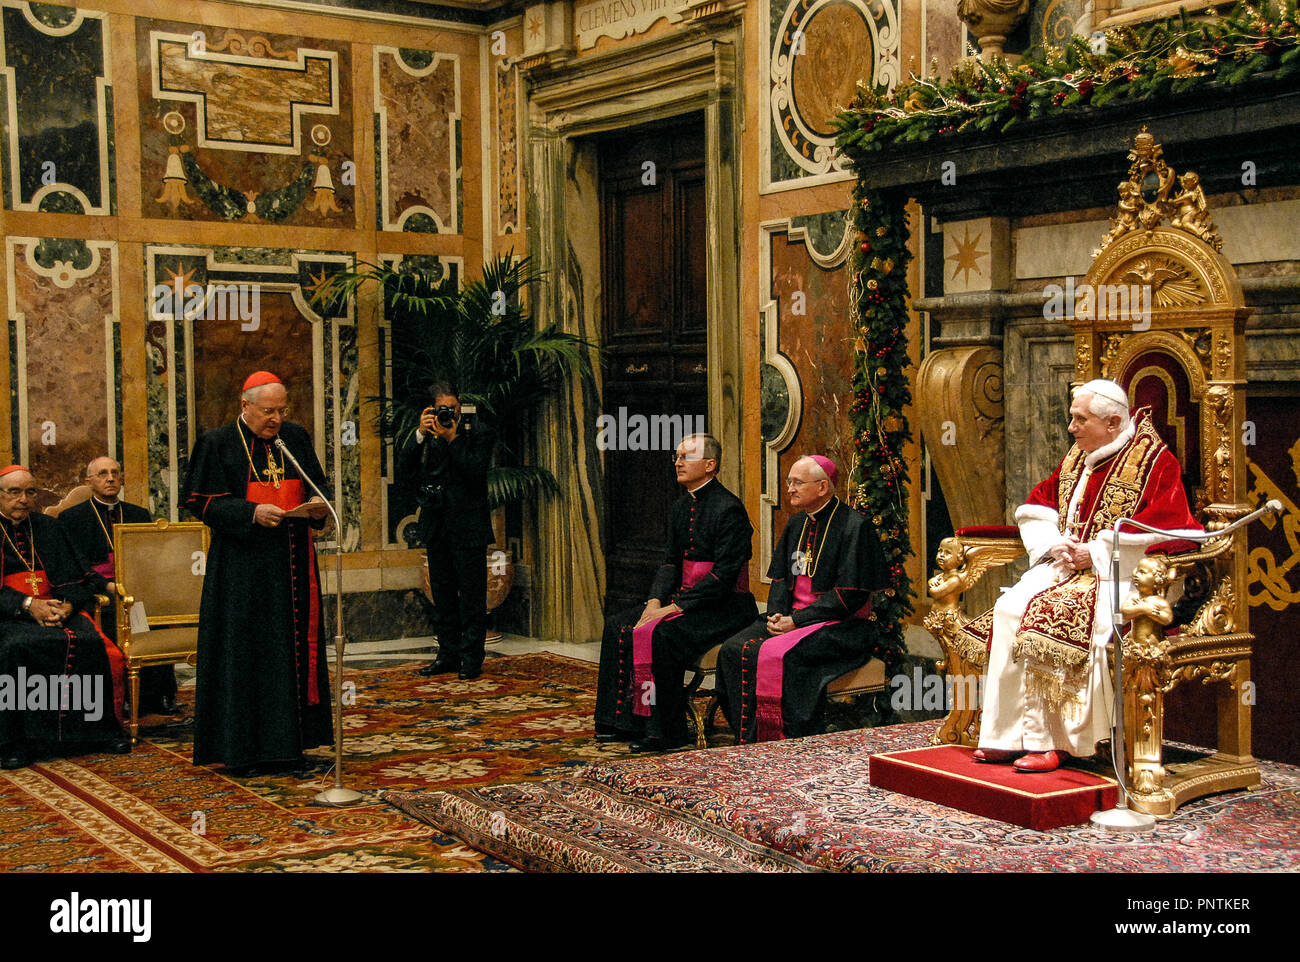 Vatican City -21/12/2007 - Pope Benedict XVI - ADDRESS OF HIS HOLINESS BENEDICT XVI TO THE ROMAN CURIA ON THE OCCASION OF THE PRESENTATION OF THE CHRISTMAS GREETINGS - Sala Clementina Stock Photo